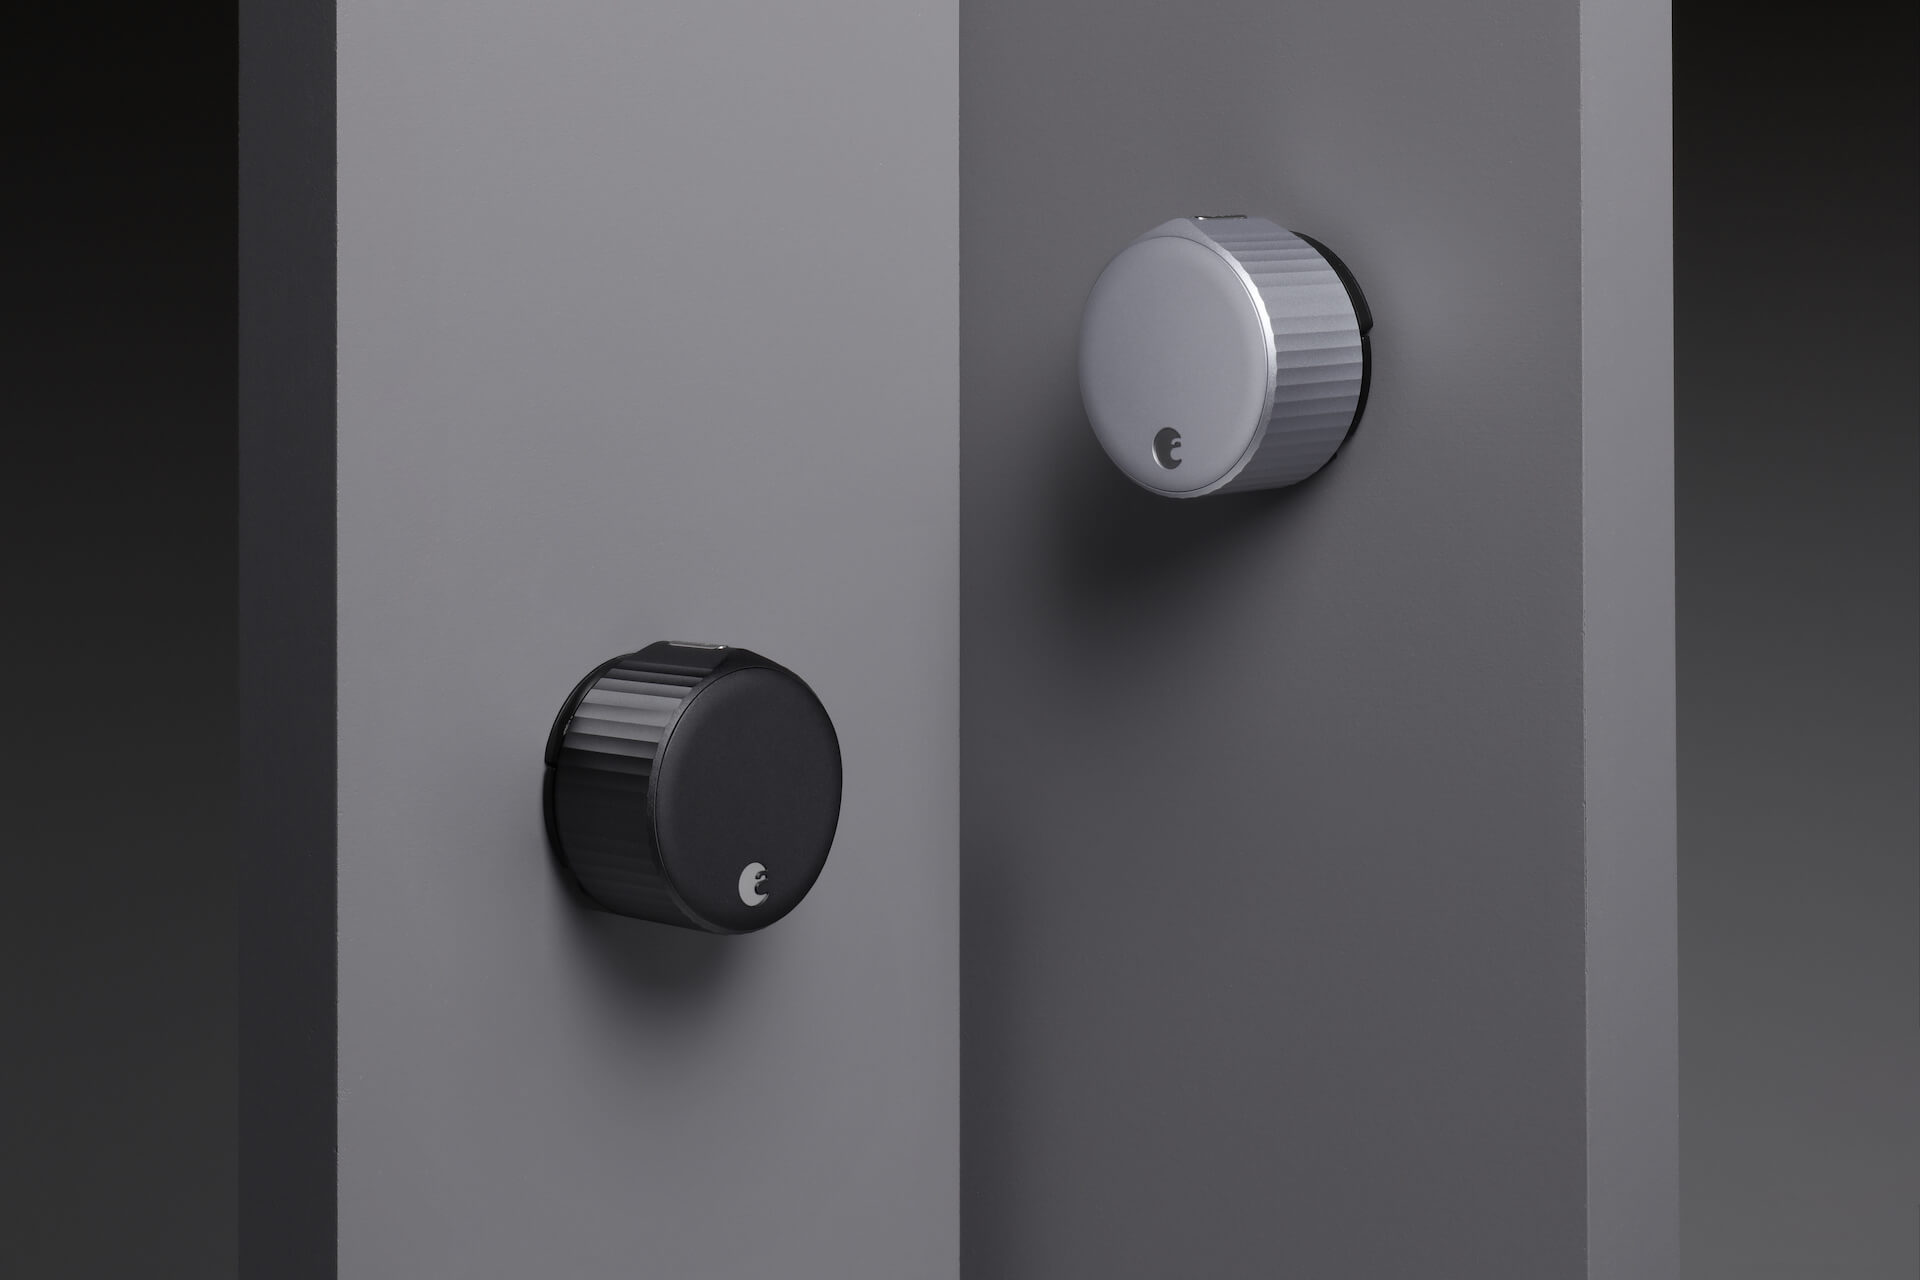 August Wi-Fi Smart Lock - available in two colors